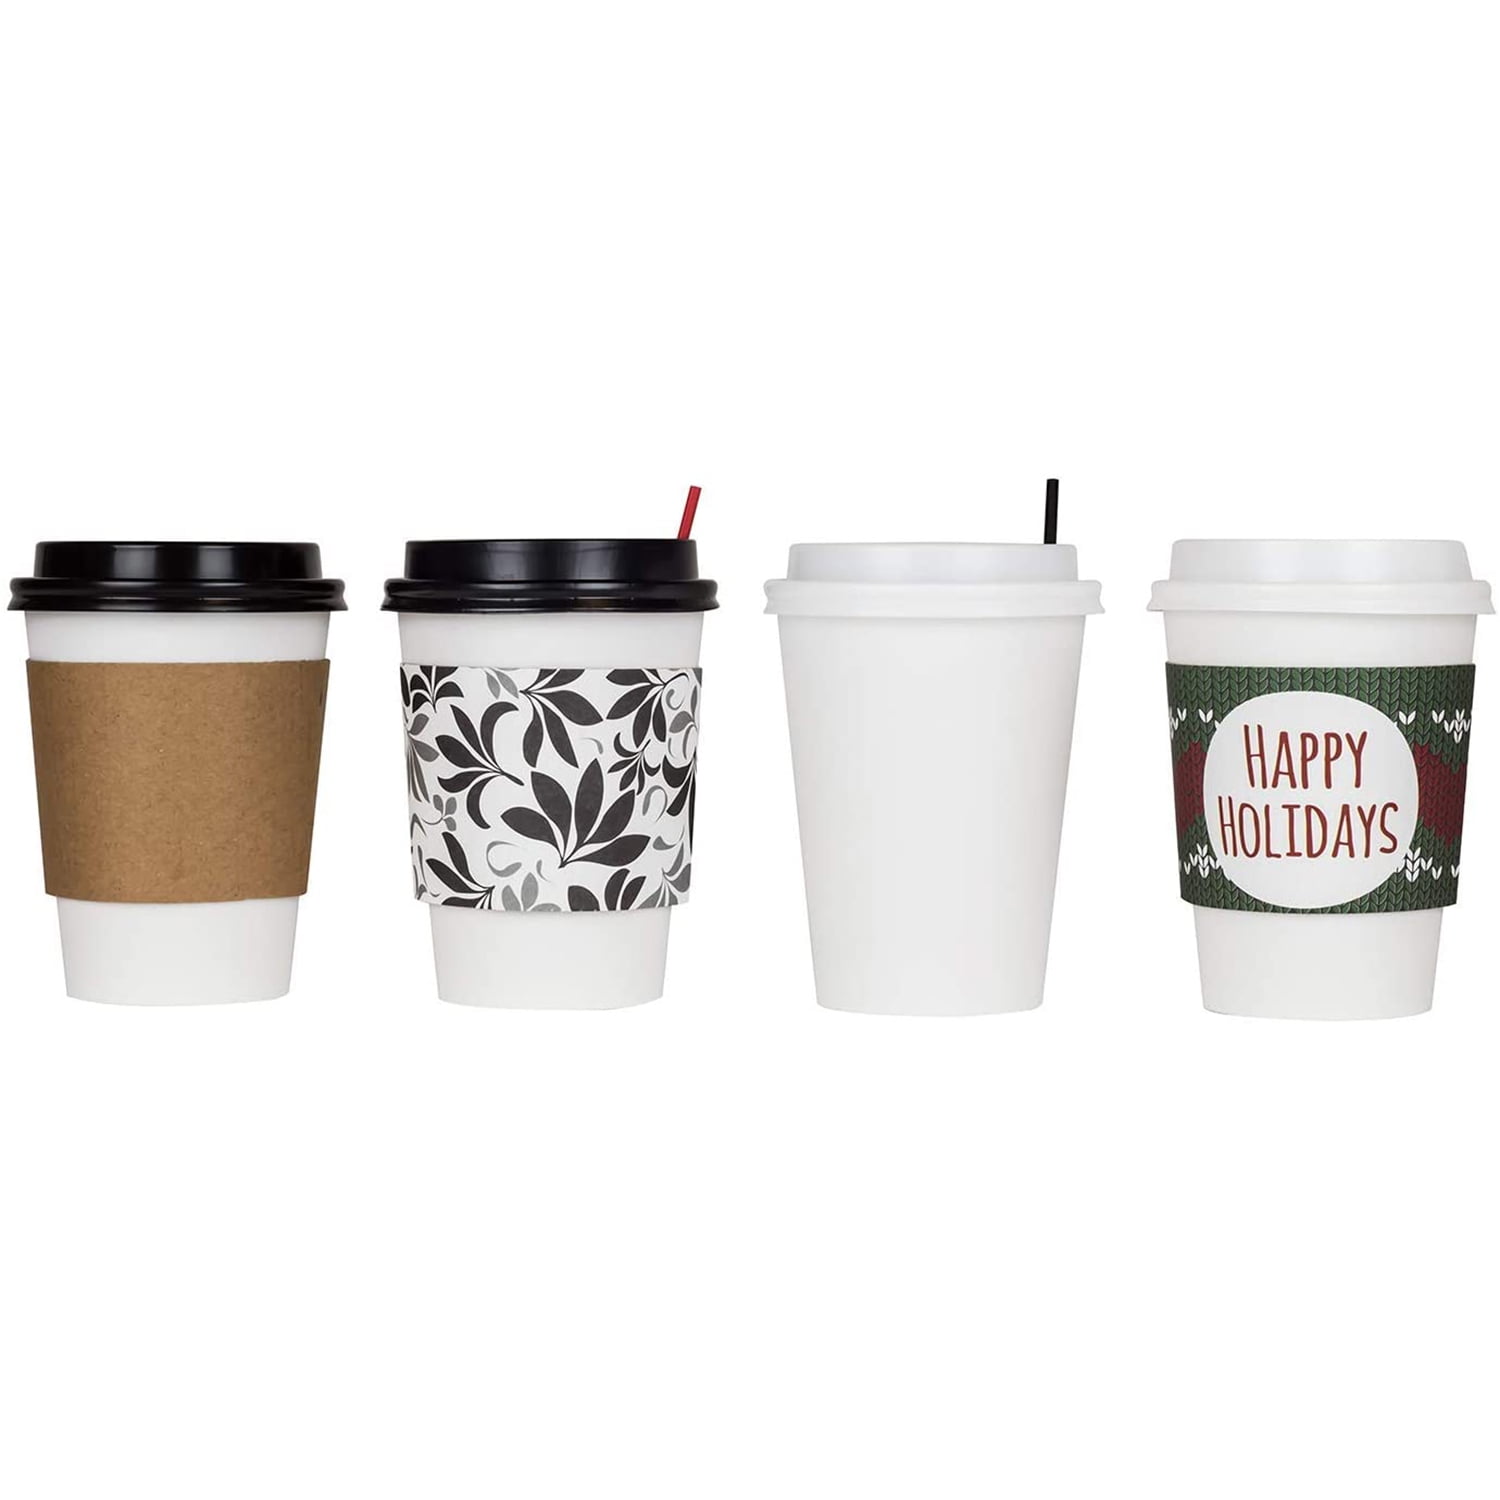 Karat C-KIC516W 16 oz Insulated Paper Hot Cup, White, White (Pack of 500)